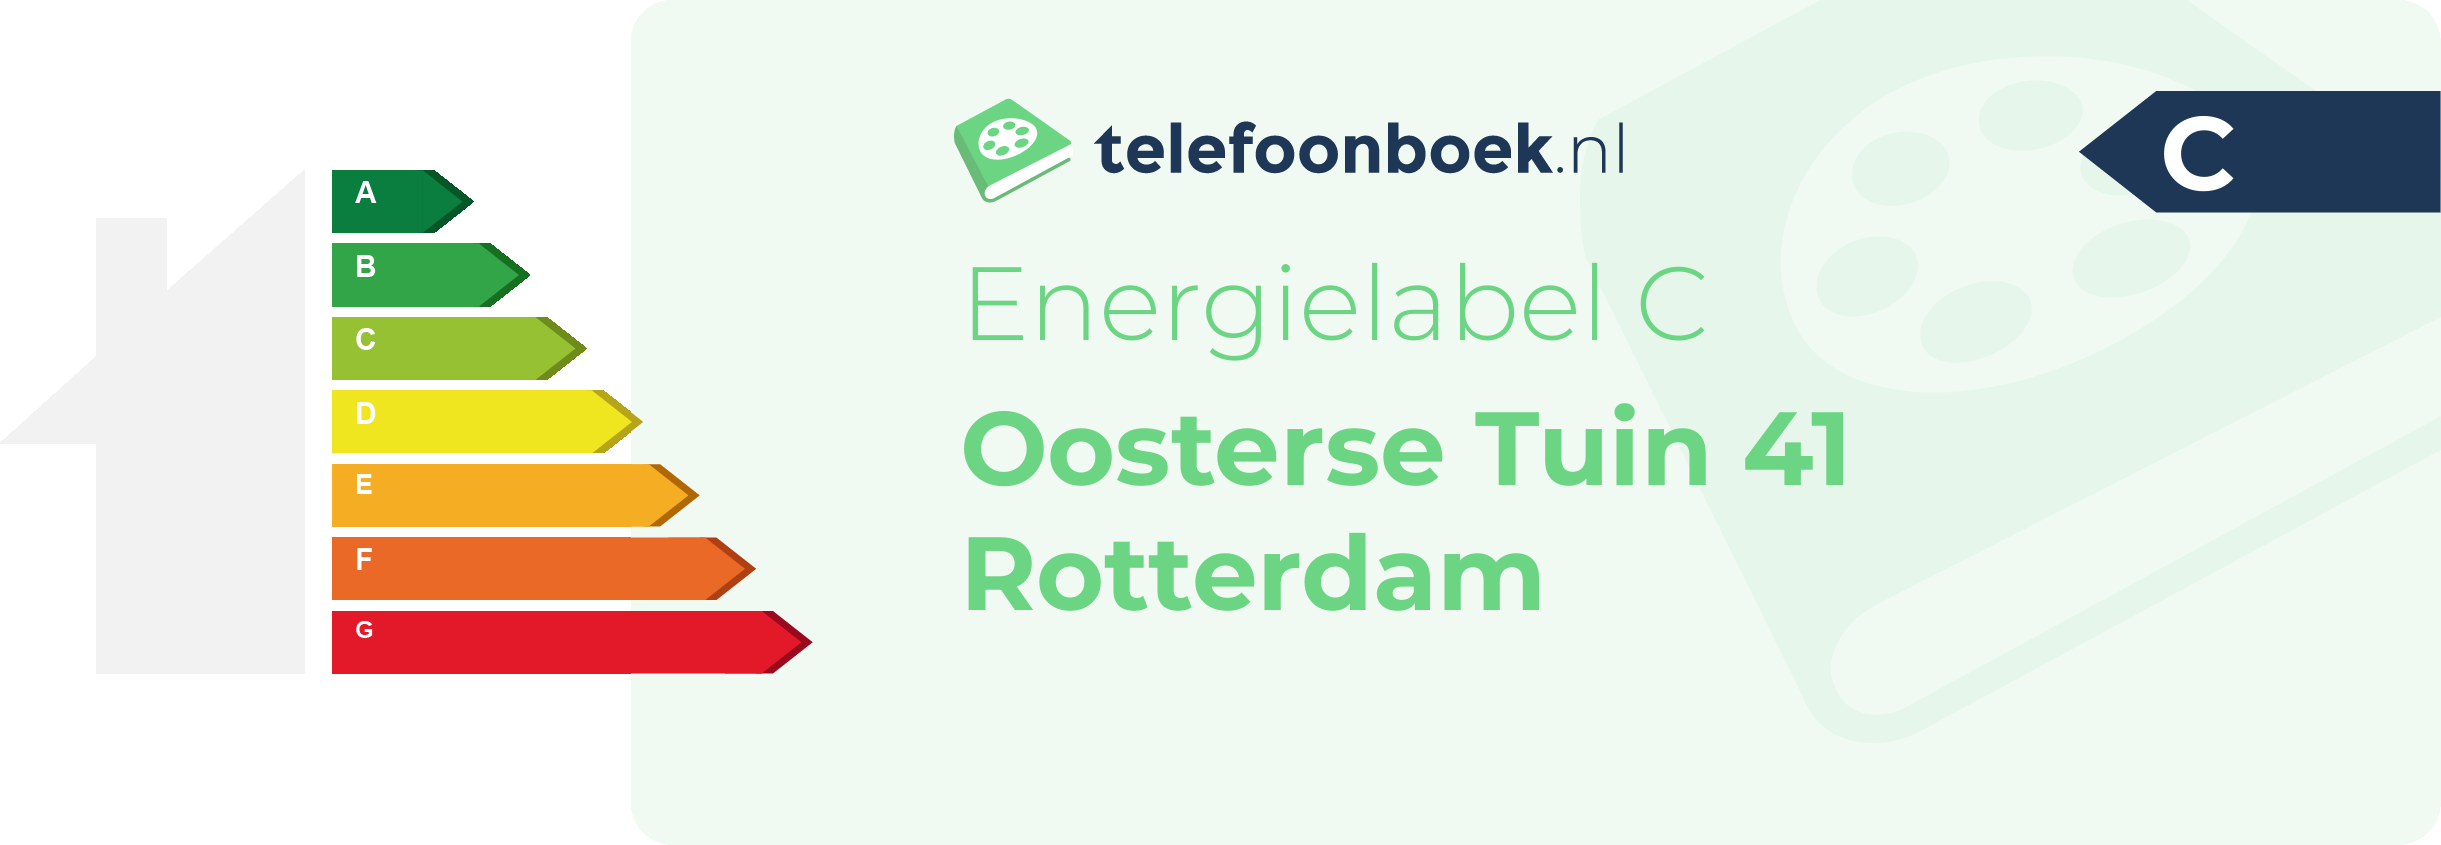 Energielabel Oosterse Tuin 41 Rotterdam